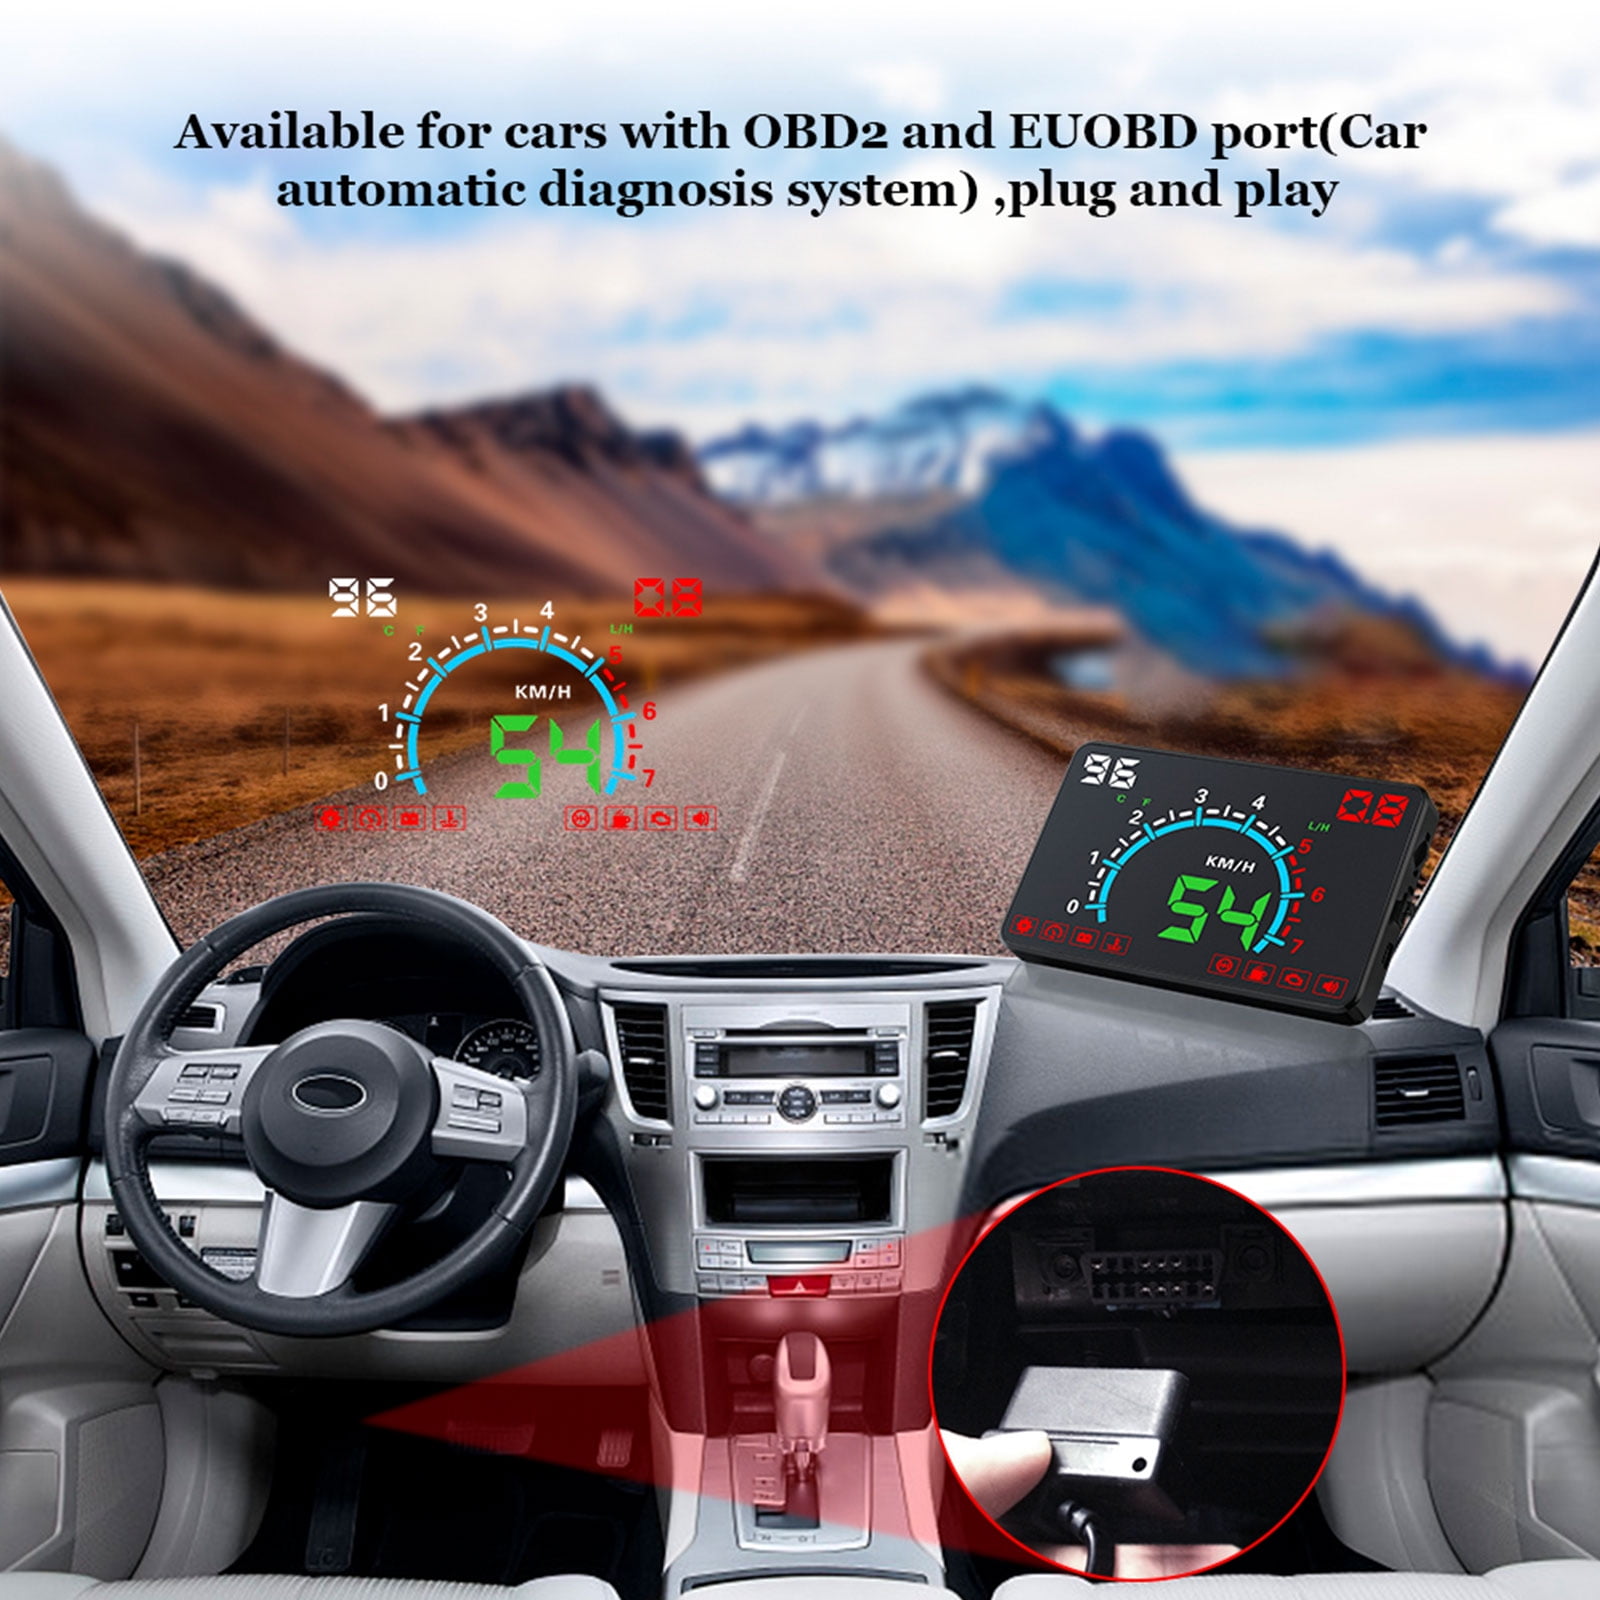 5.8'' Car HUD Head Up GPS Speedometer Display RPM Water Temp Fuel For OBDII Cars